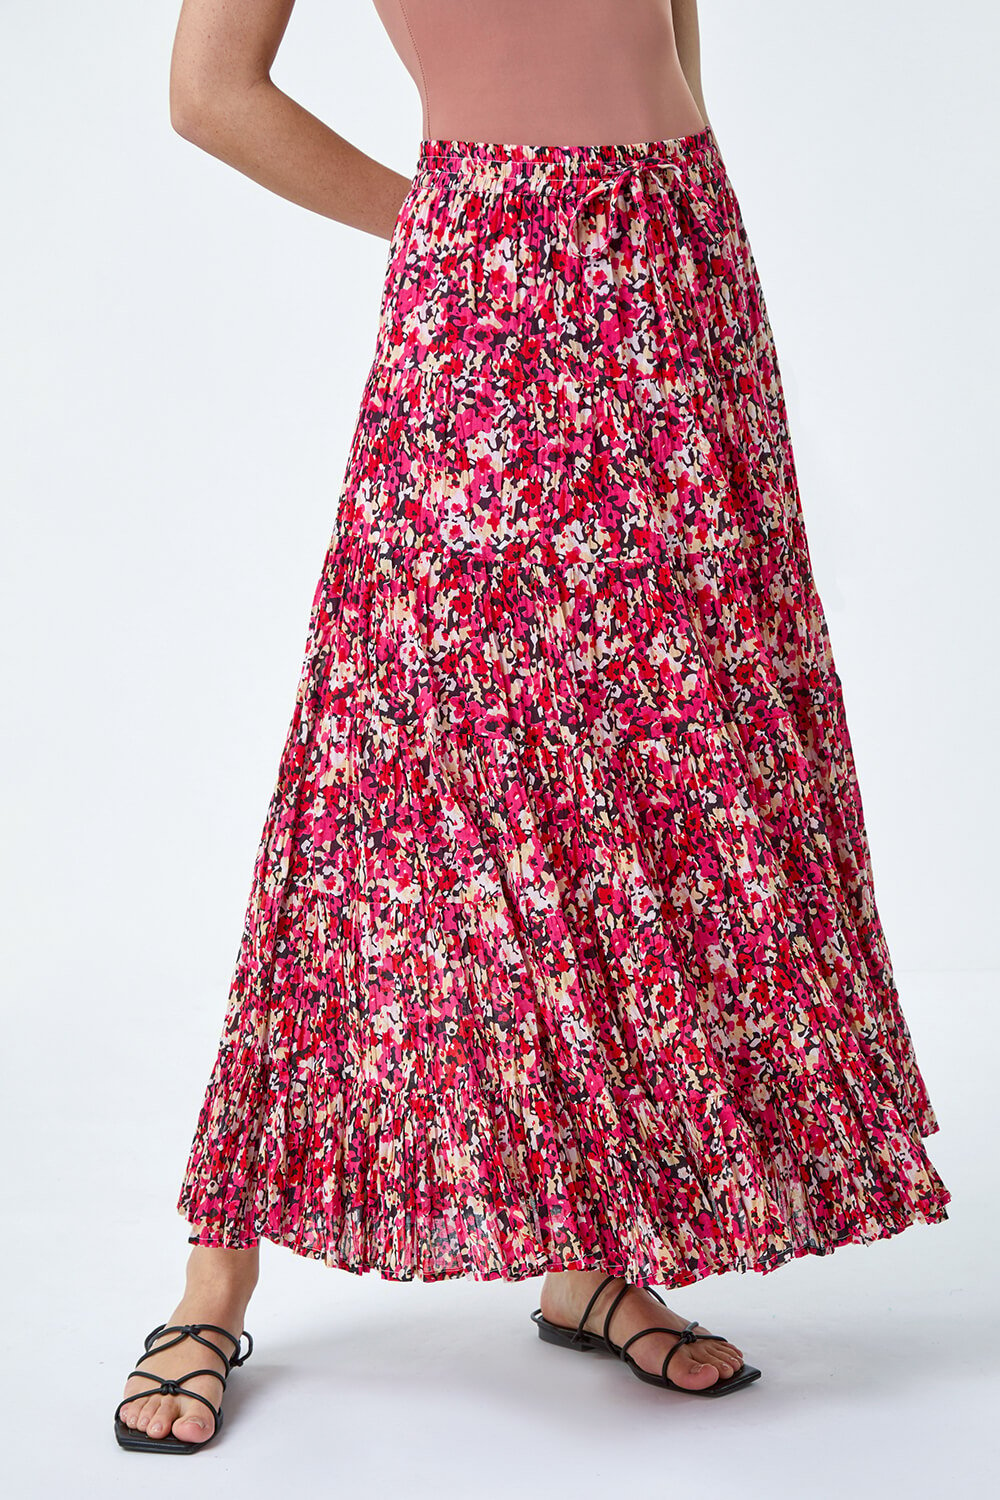 PINK Floral Crinkle Cotton Tiered Maxi Skirt, Image 4 of 5